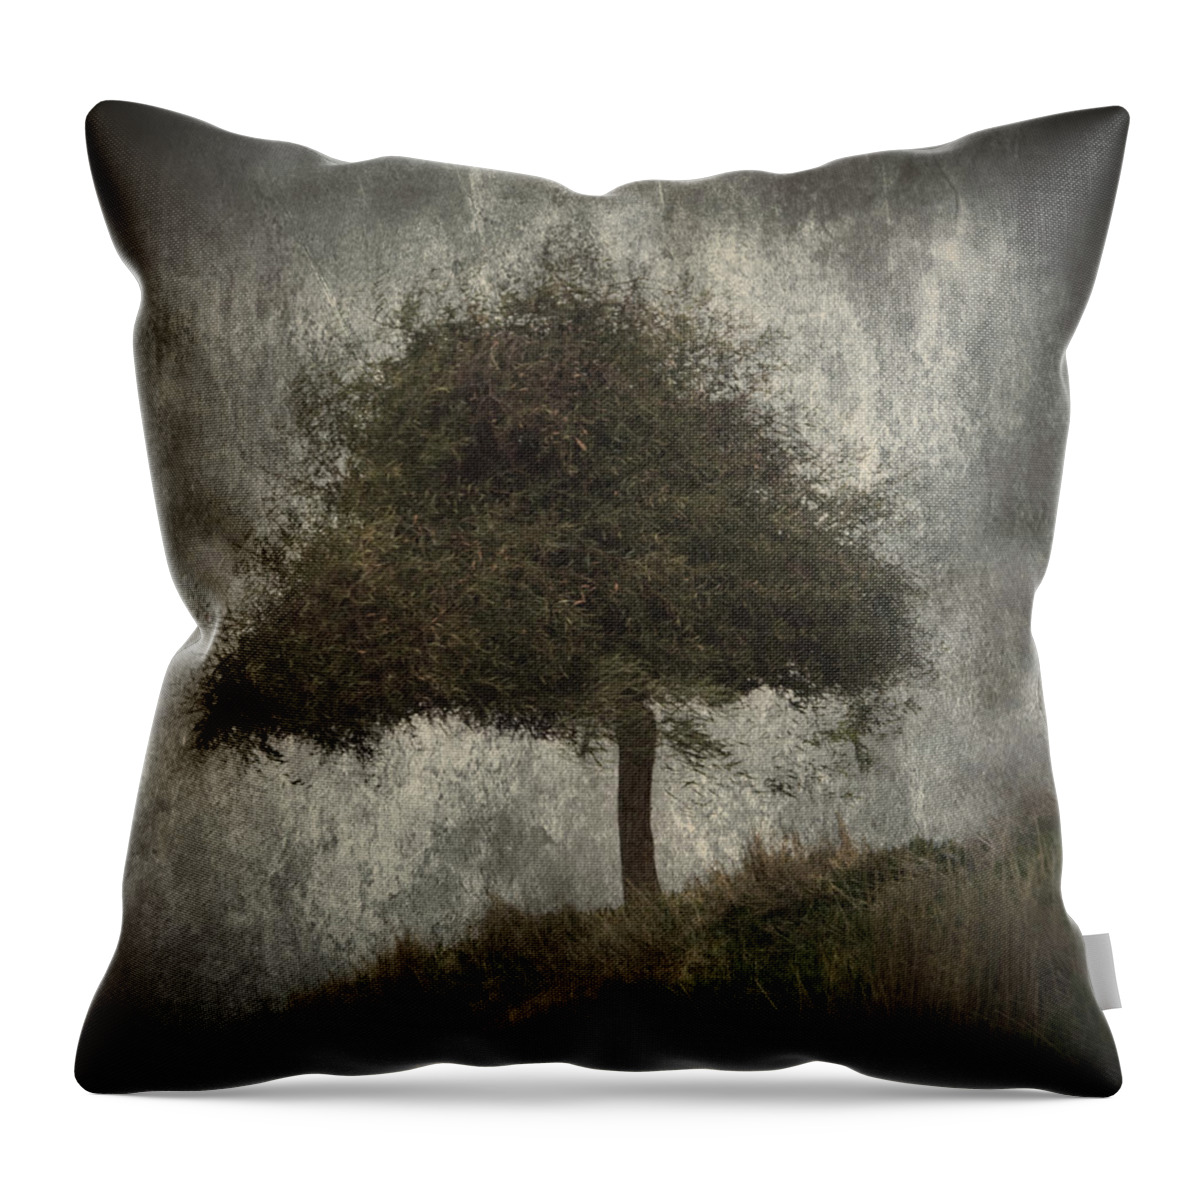 Alone Throw Pillow featuring the photograph Lonely Tree by Stelios Kleanthous